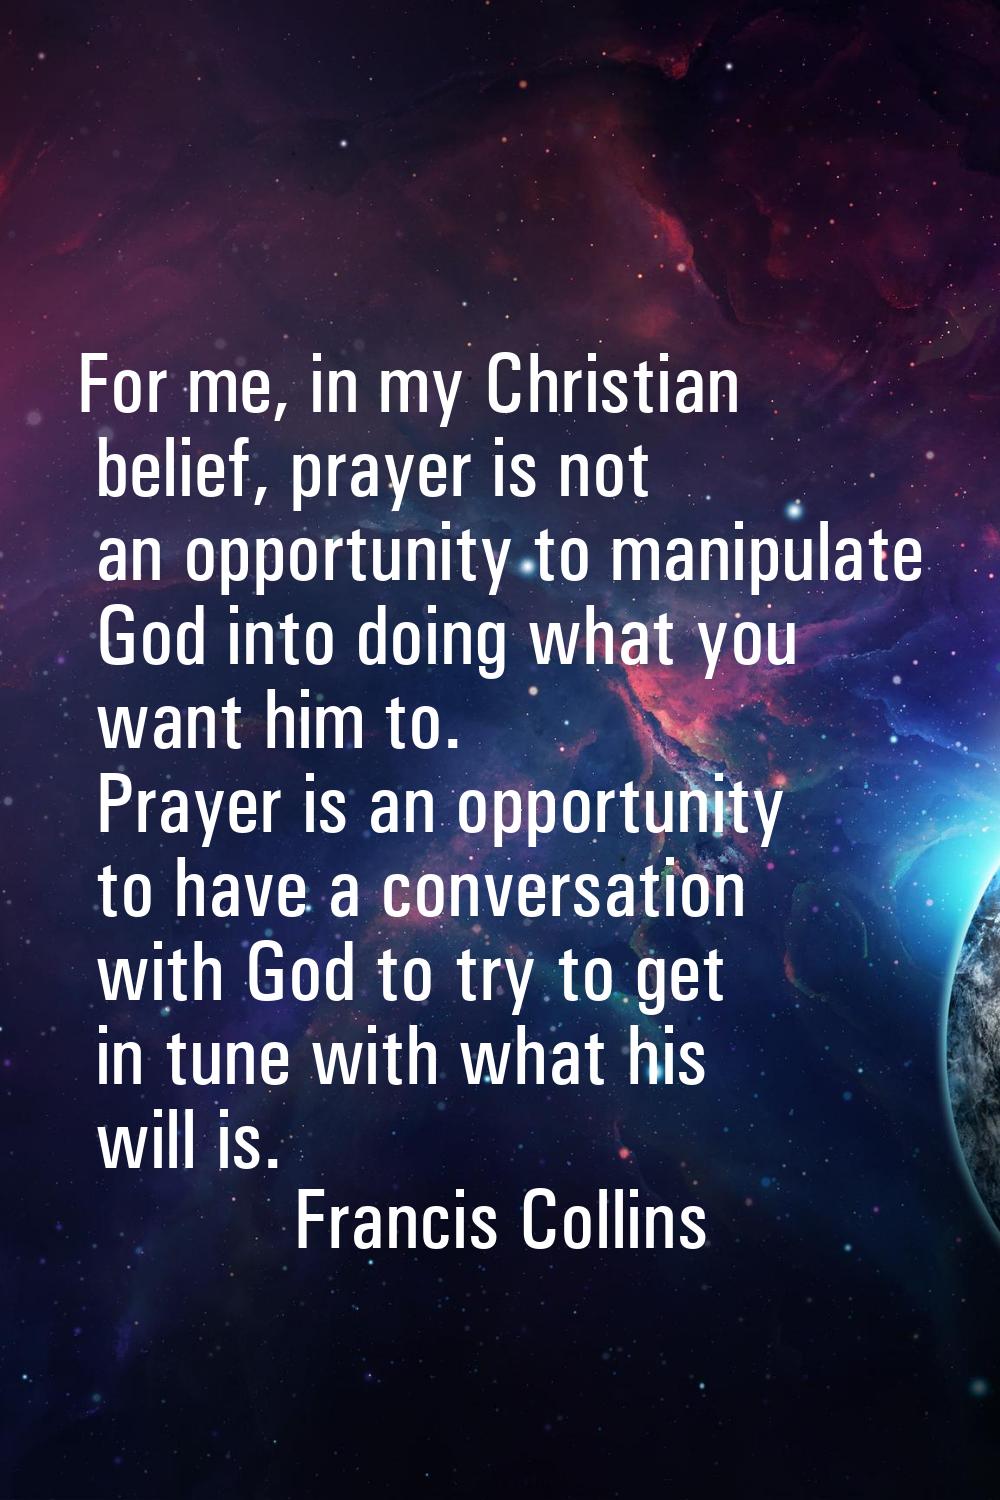 For me, in my Christian belief, prayer is not an opportunity to manipulate God into doing what you 